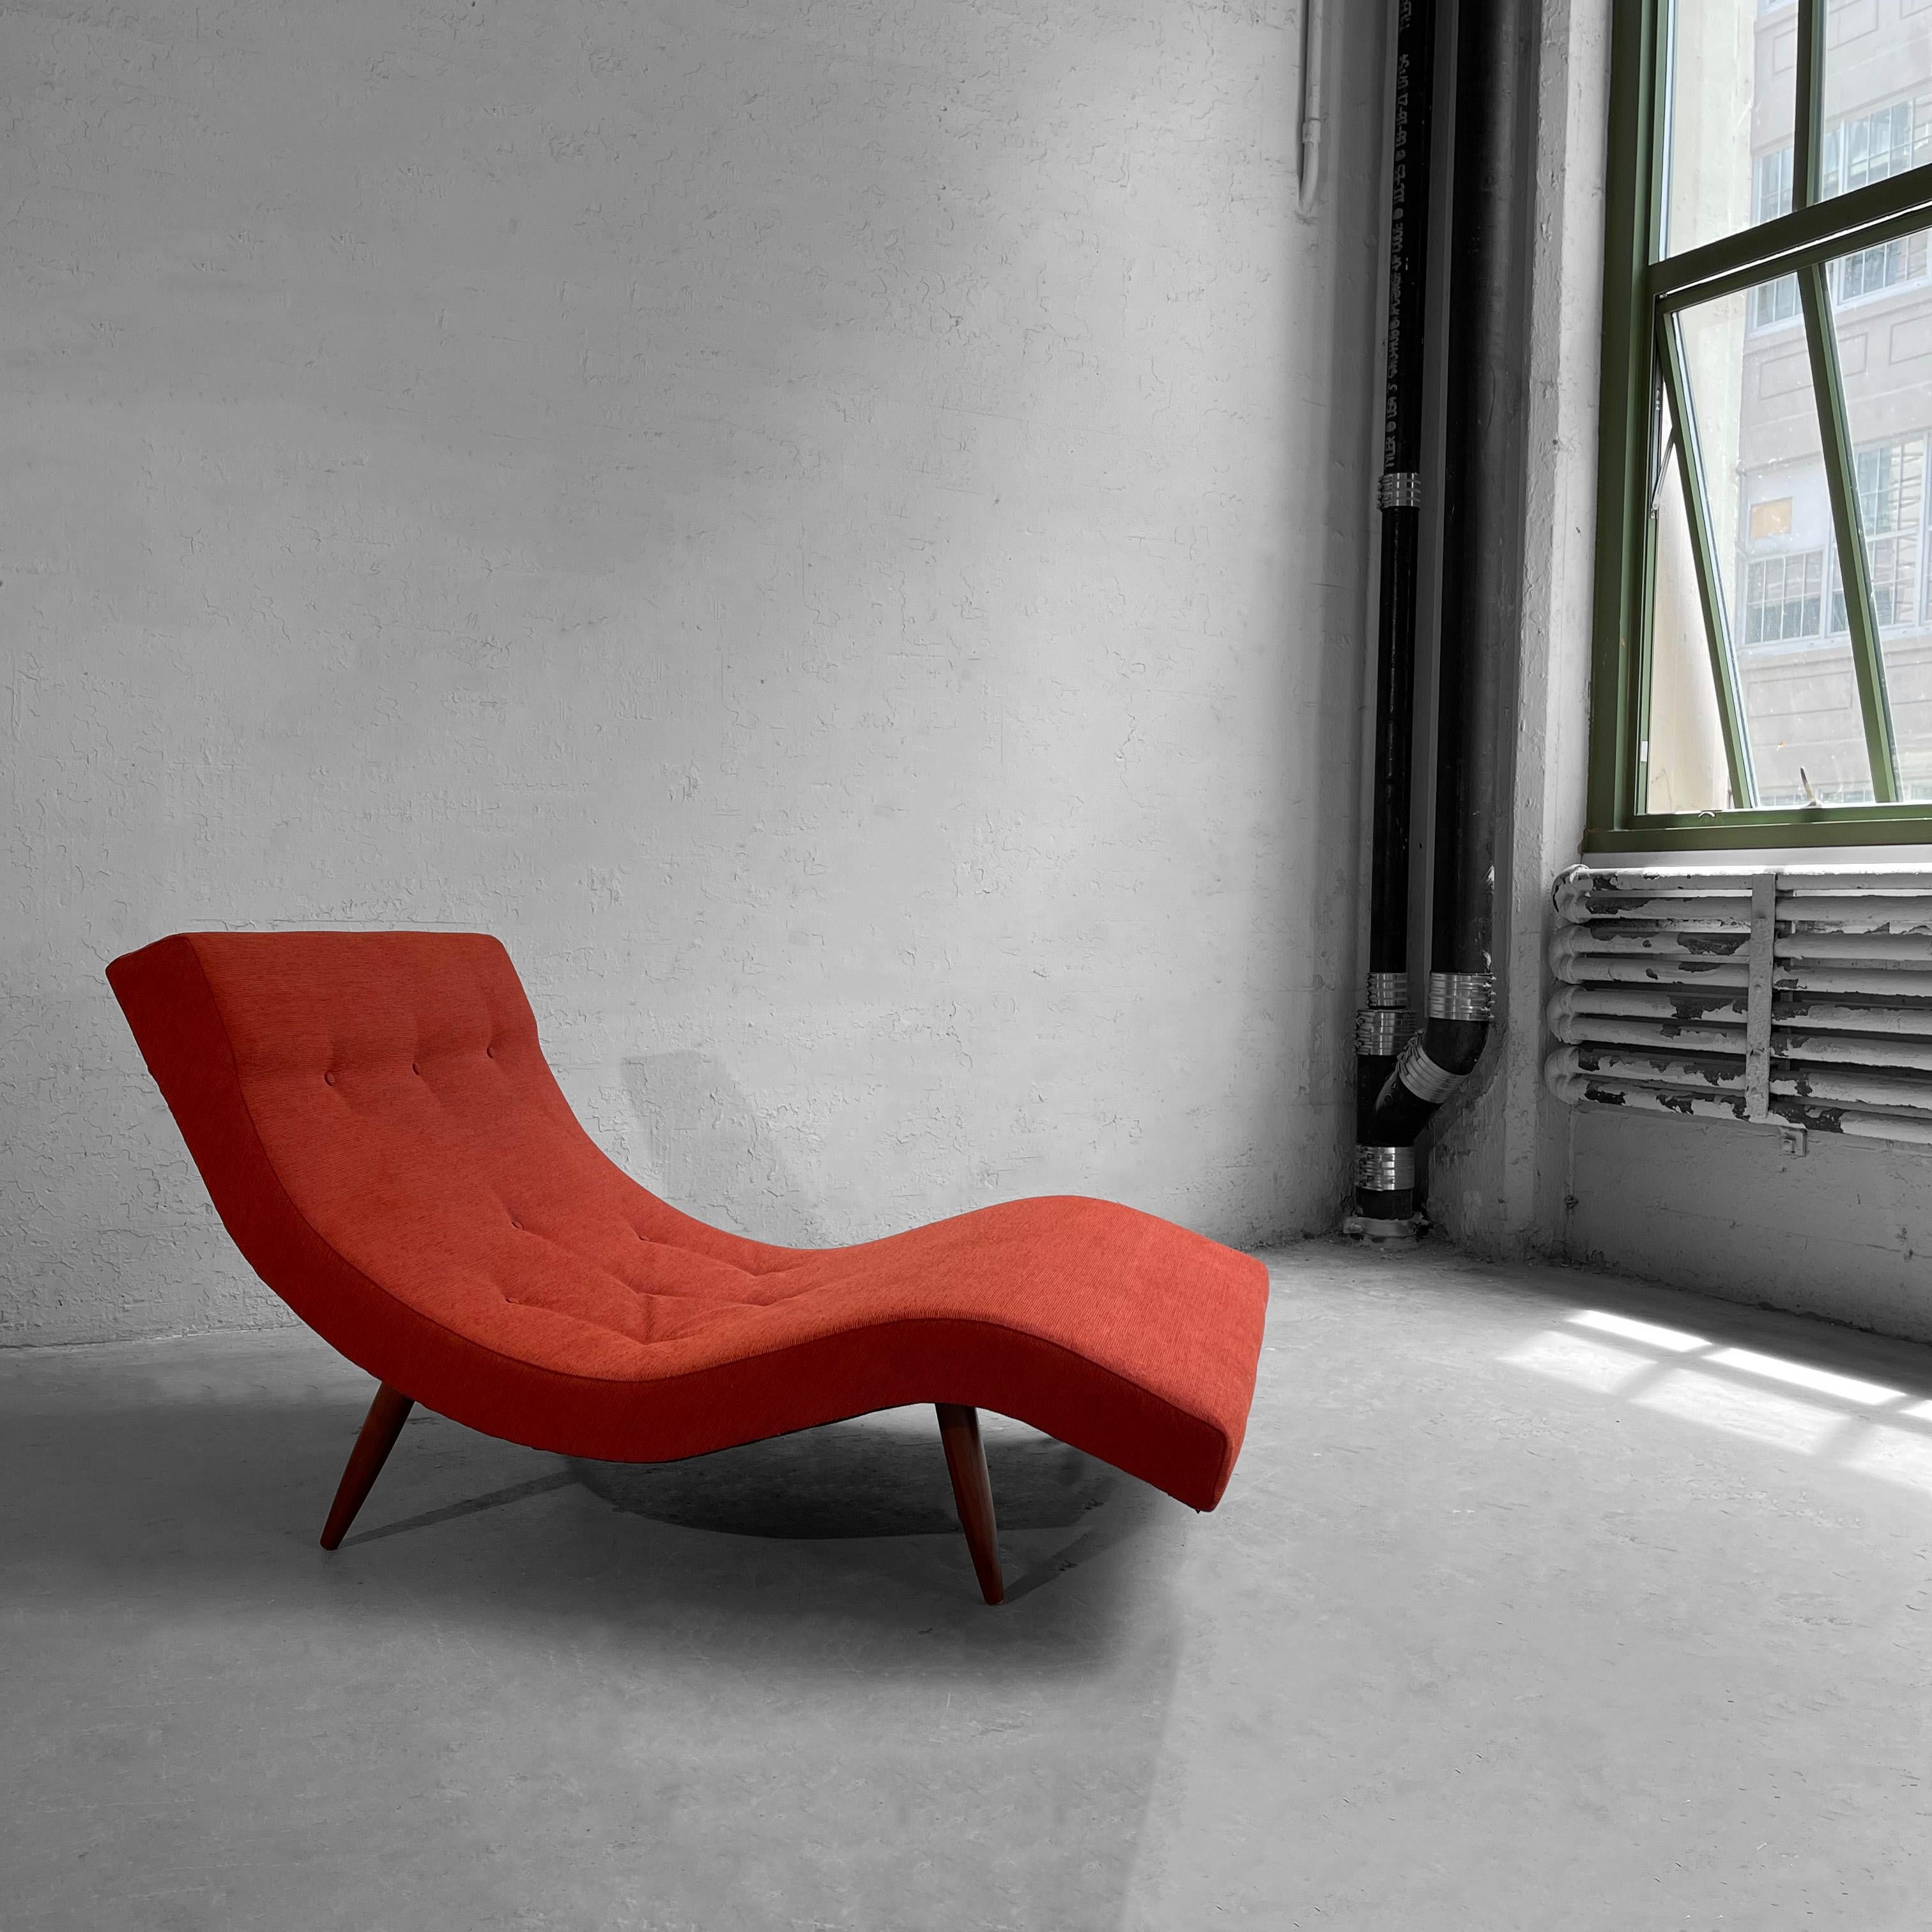 American Mid-Century Modern Wave Chaise Longue by Adrian Pearsall